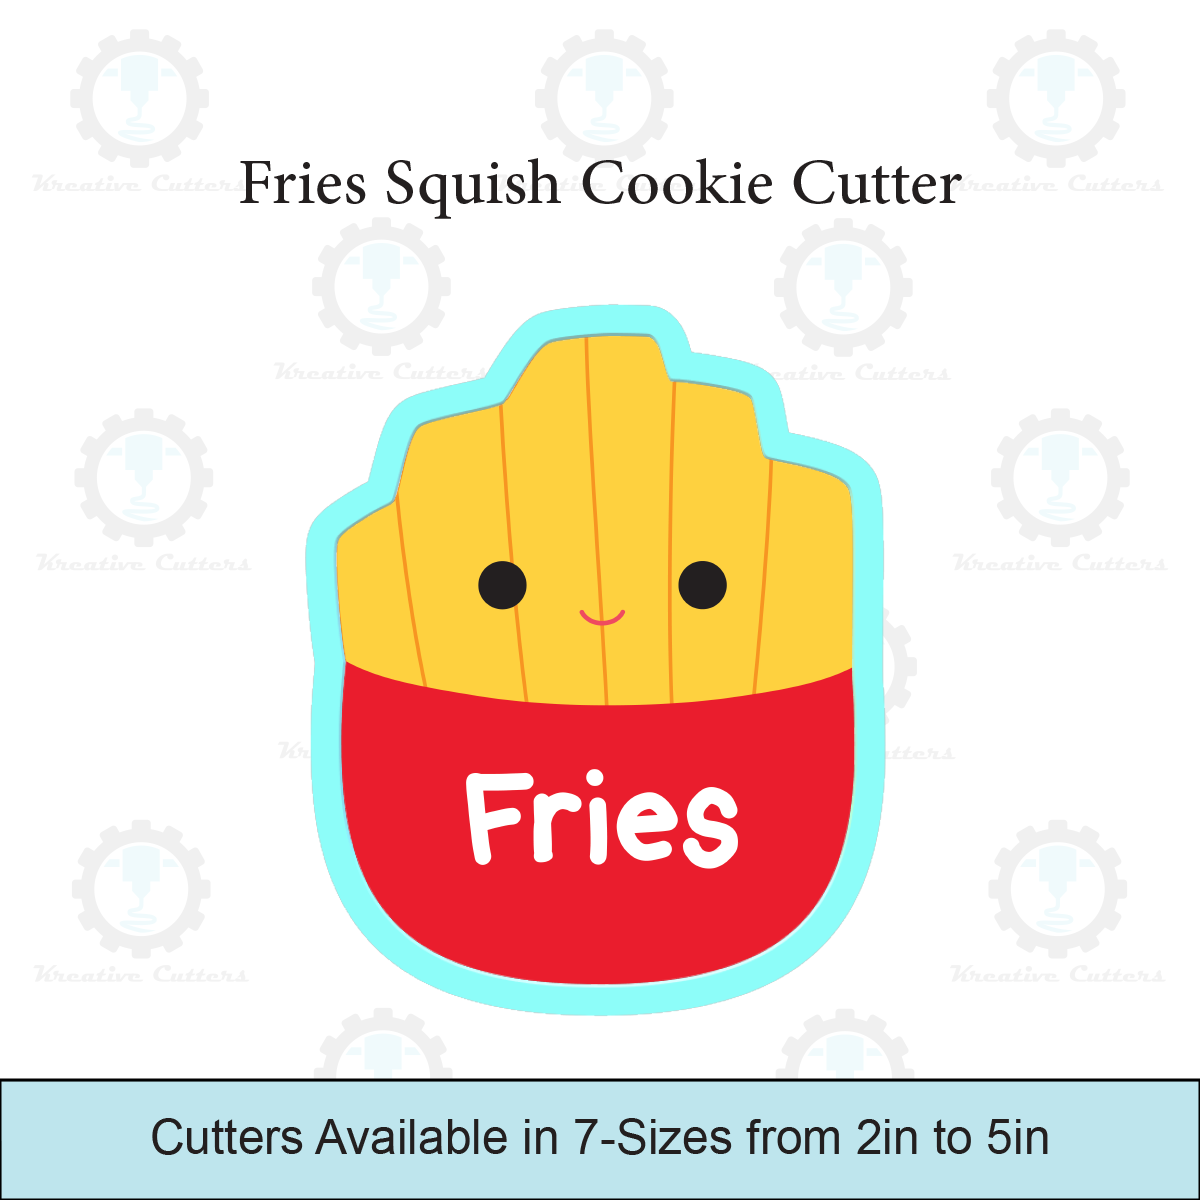 Fries Squish Cookie Cutters